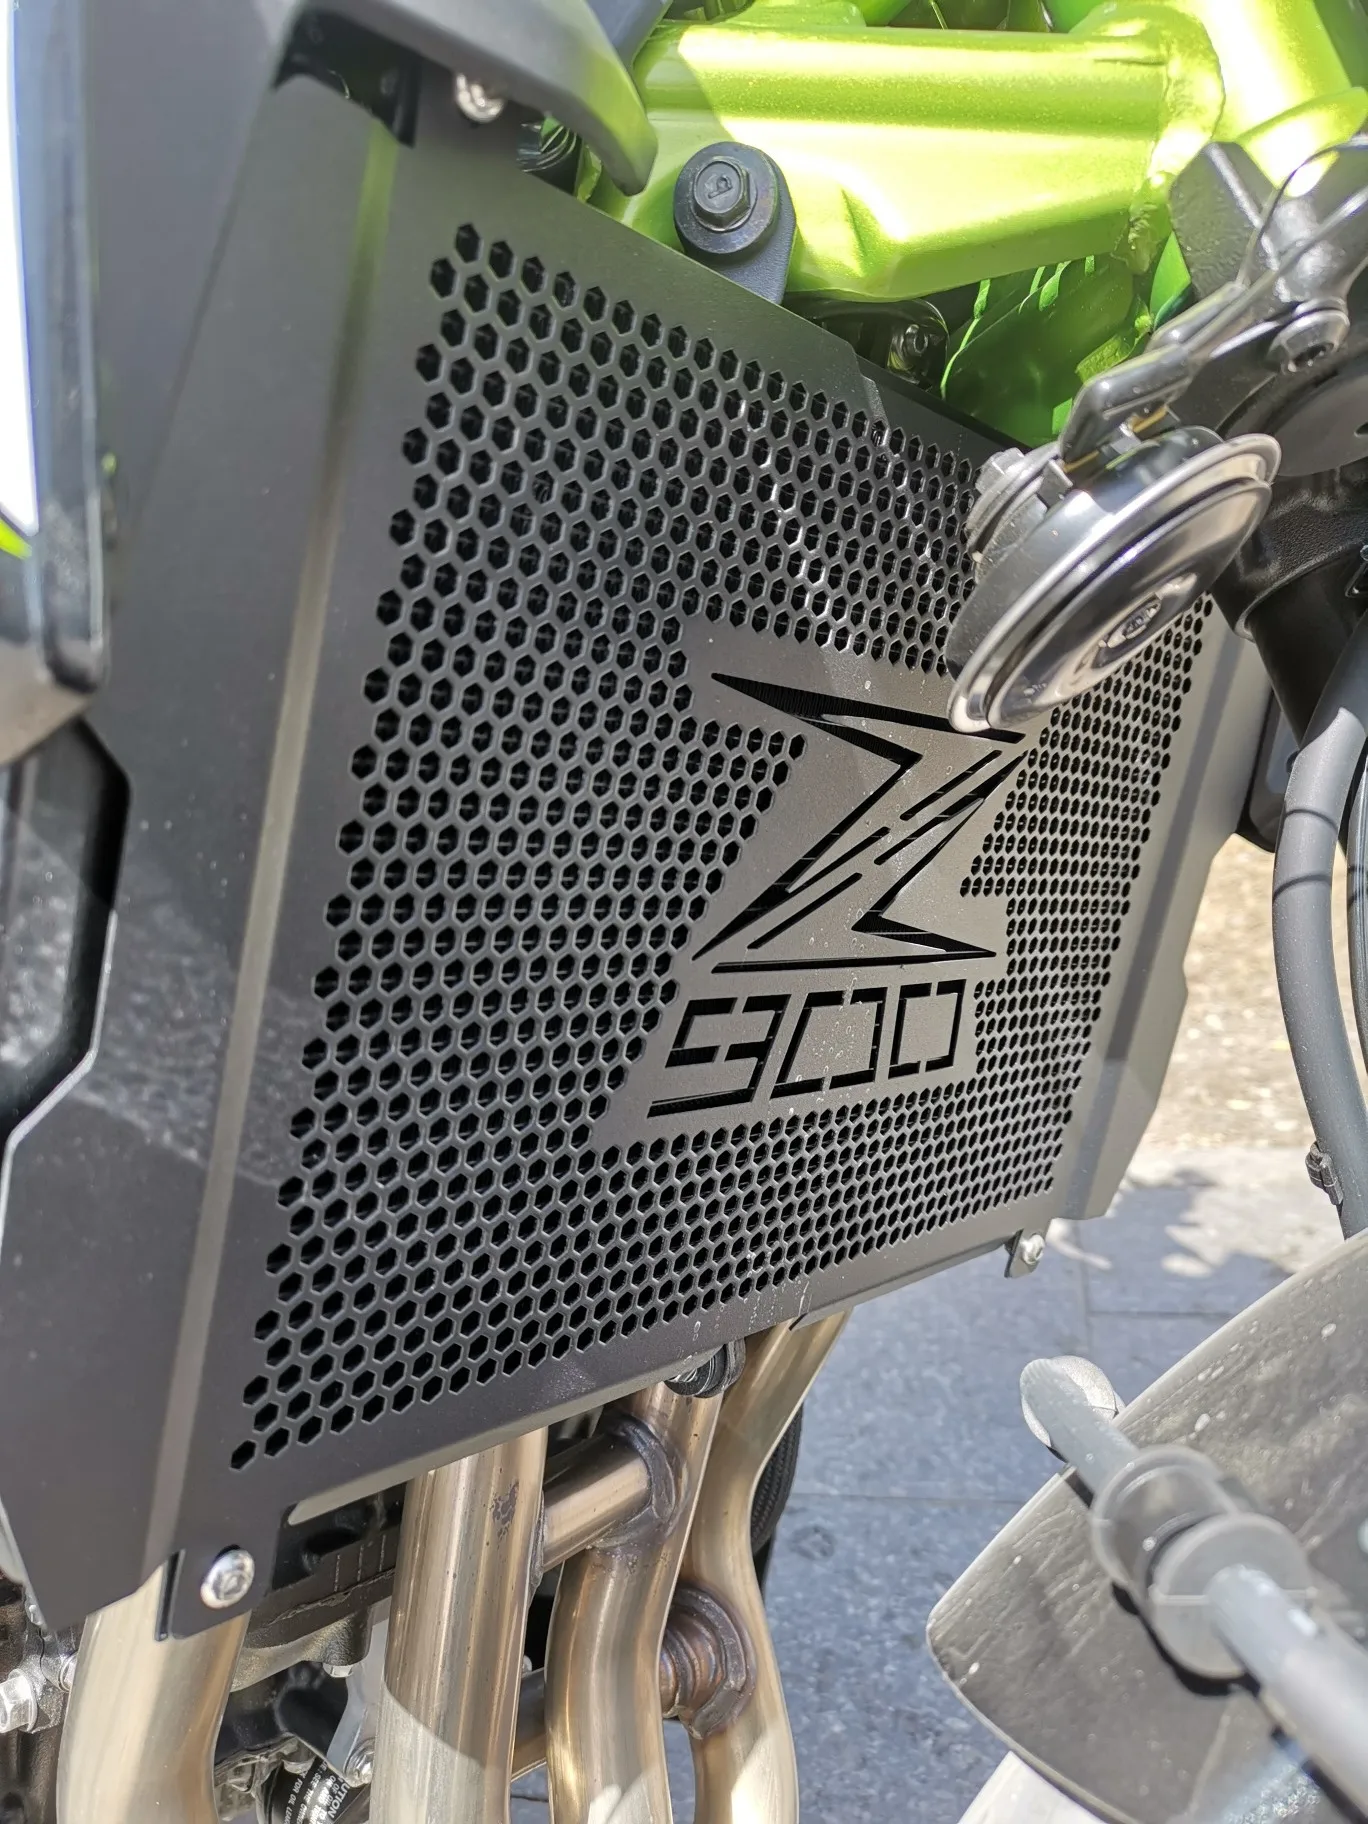 Z900 2023 Motorcycle Accessories Radiator Grille Guard Protector Cover For Kawasaki Z900 Z 900 2017 2018 2019 2020 2021 2022